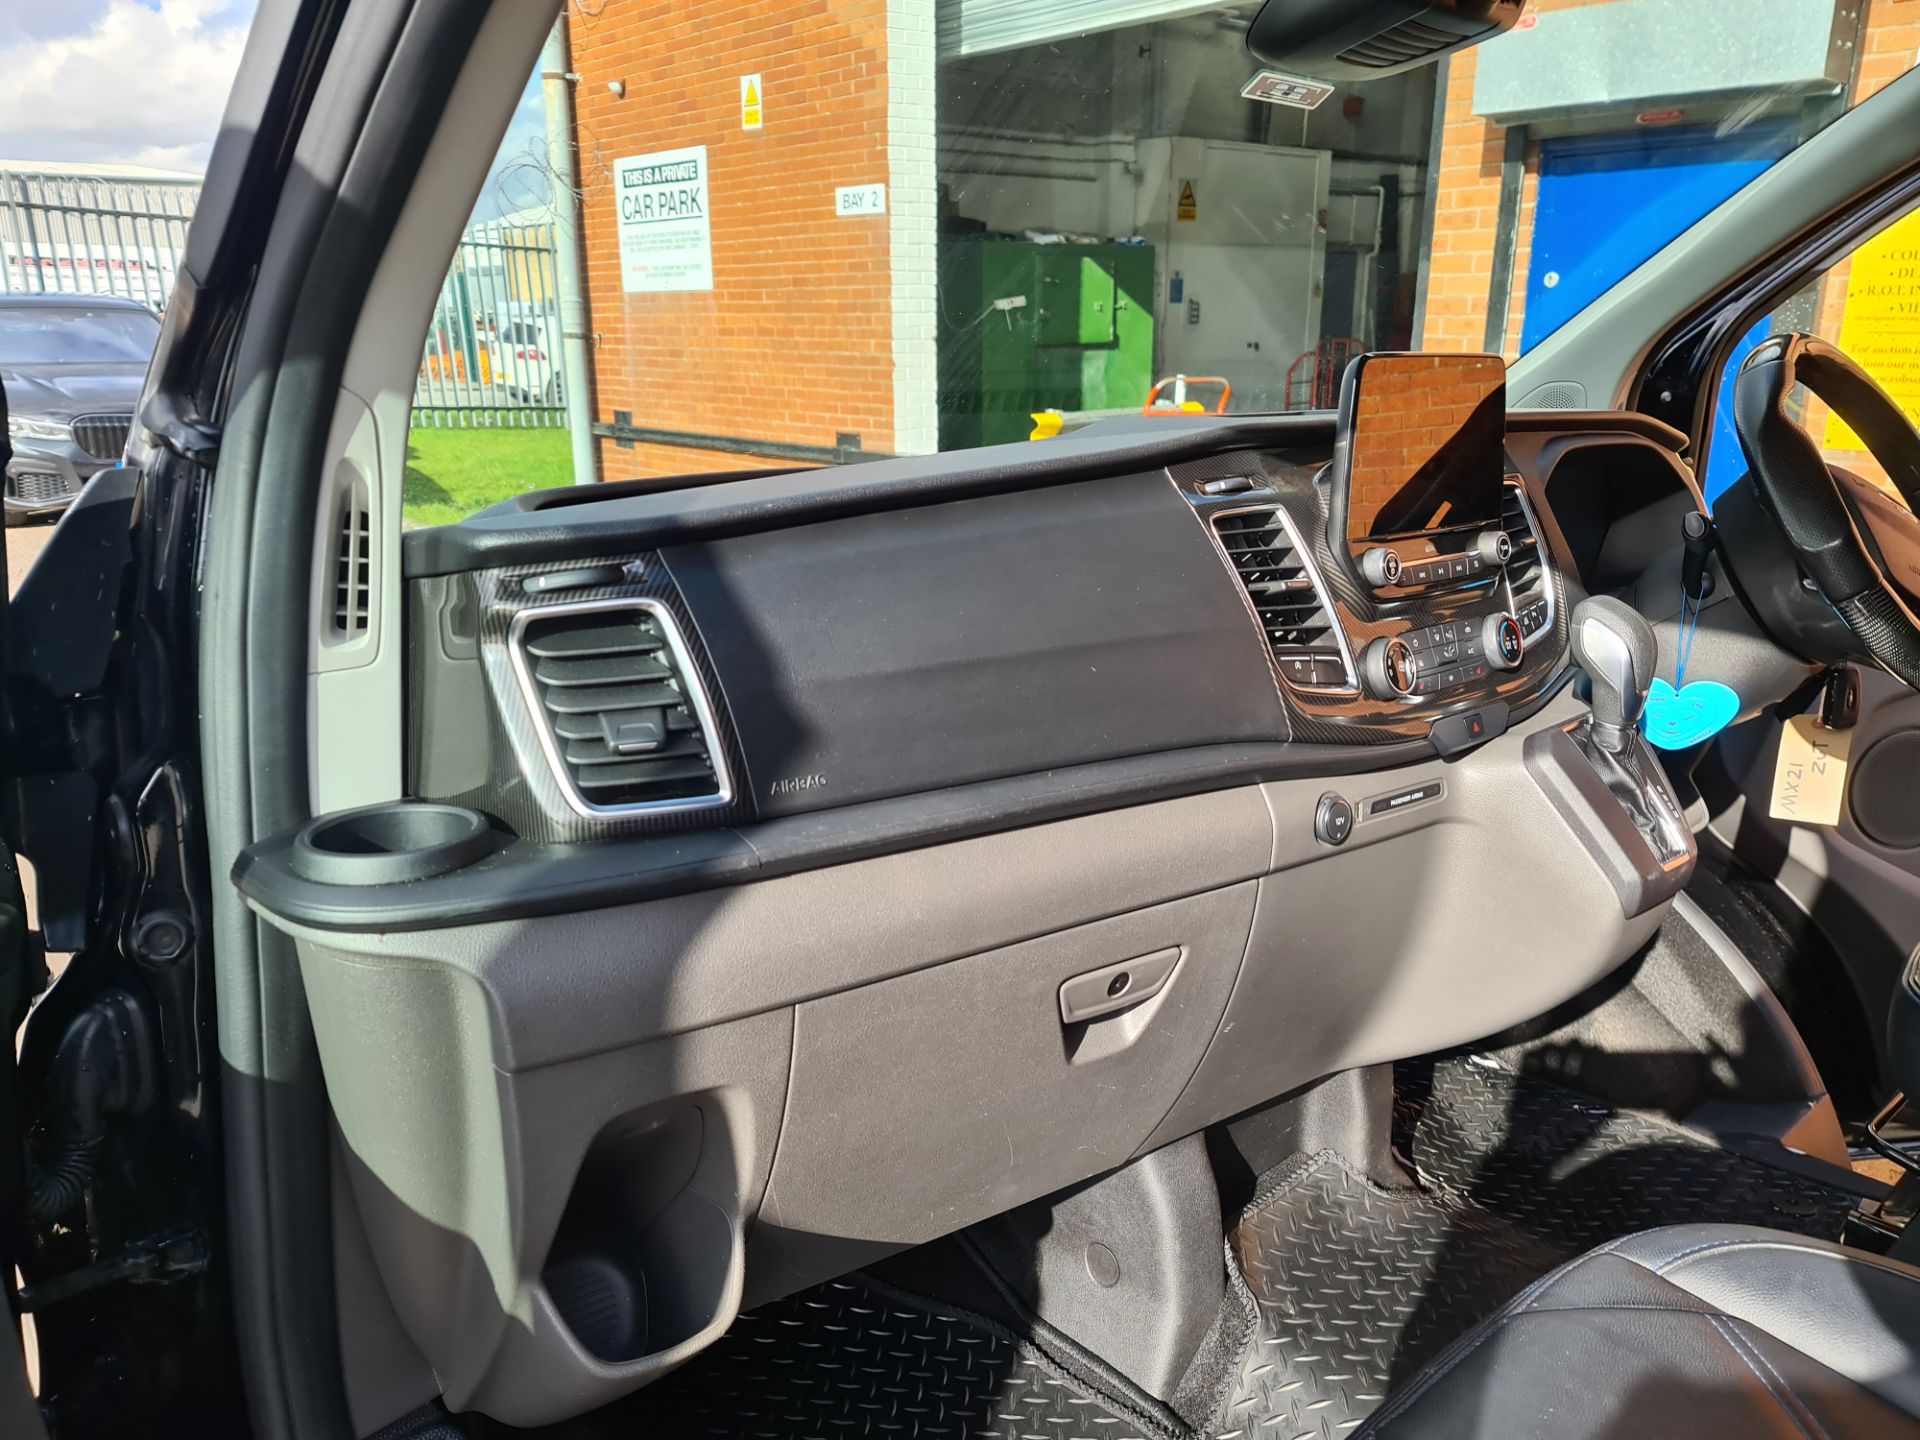 2021 Ford Transit 320LMTD Motion R panel van, auto gearbox, Ultra High Spec - Image 61 of 102